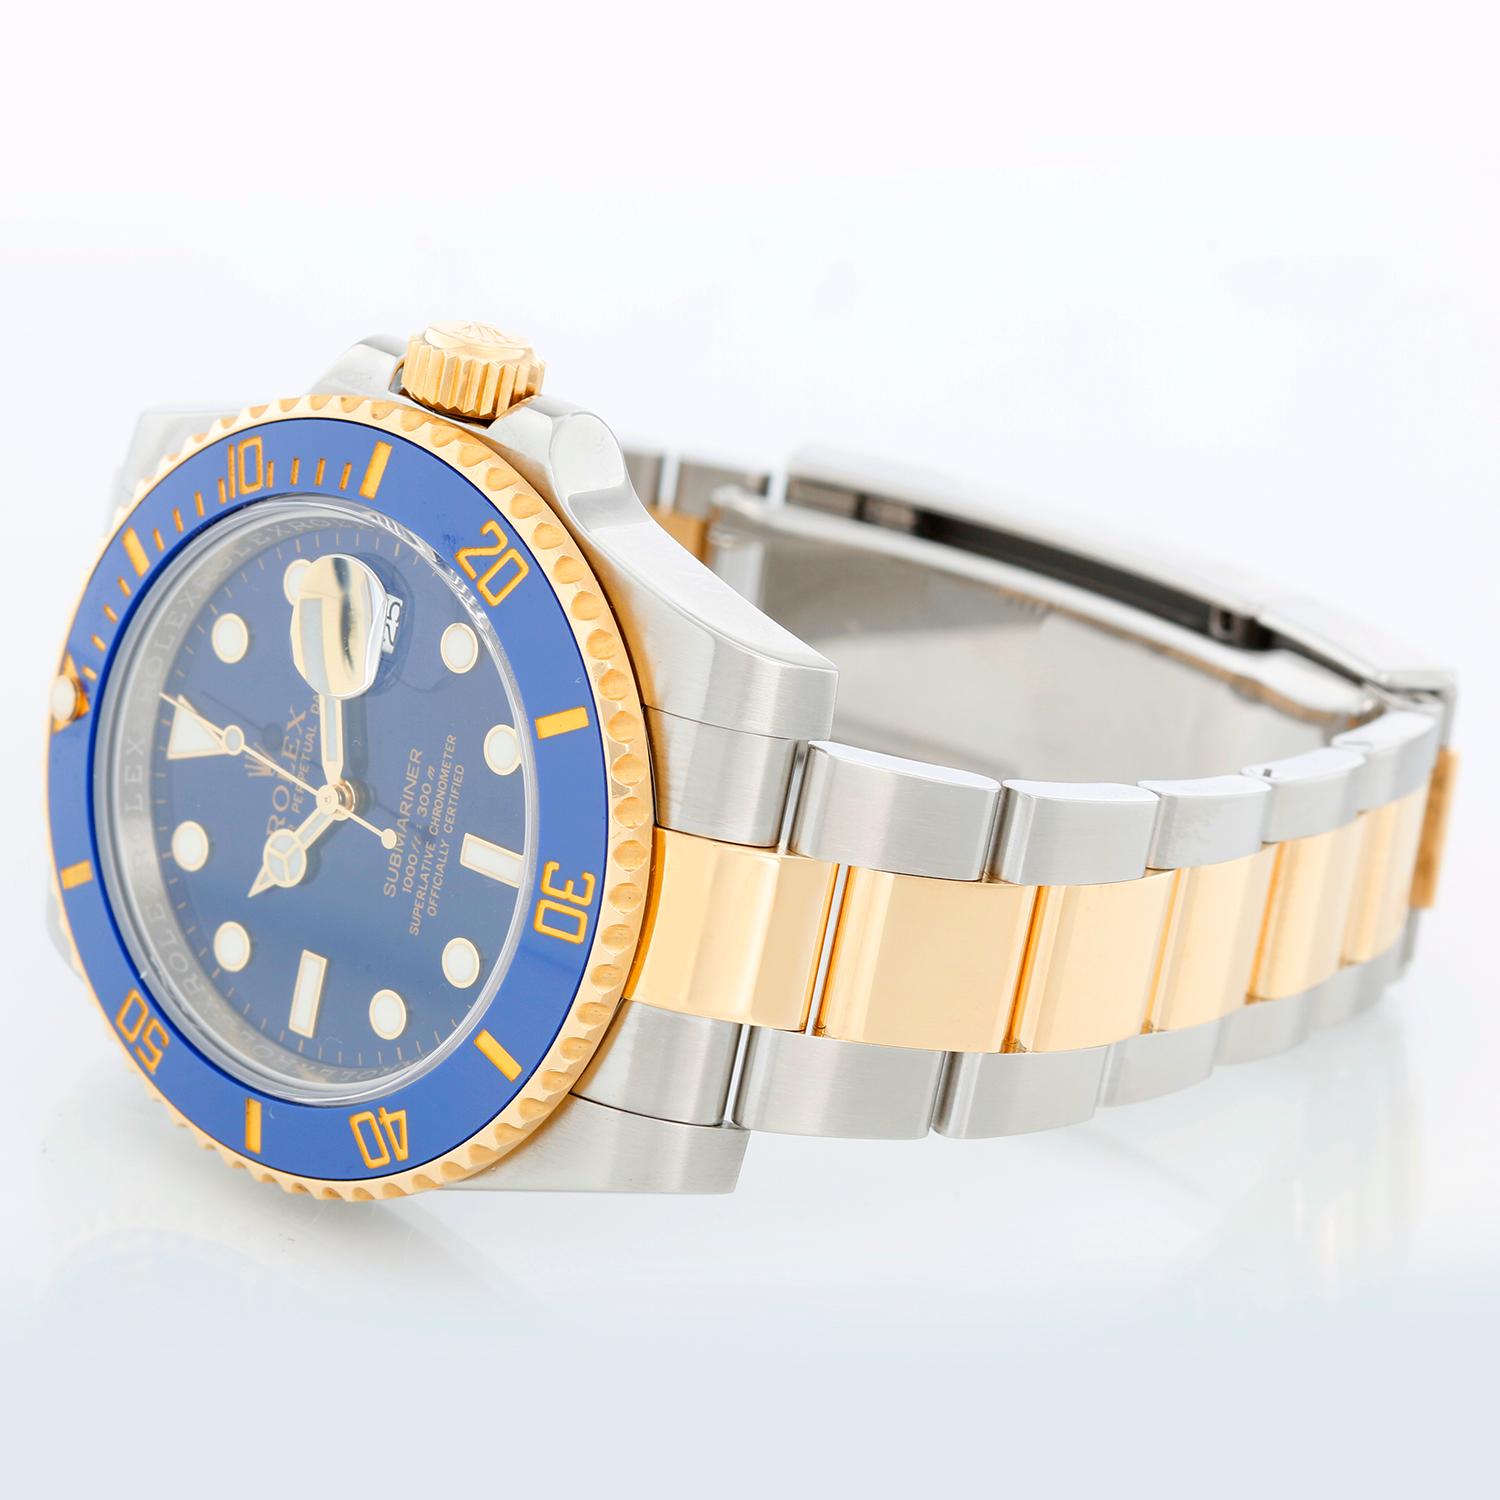 Rolex Submariner 2-Tone Steel & Gold Ceramic Engraved Bezel Watch 116613 - Automatic winding, 31 jewels. Stainless steel case with 18k yellow gold bezel with blue insert; engraved inner bezel  (40mm diameter). Blue dial with white markers; date at 3